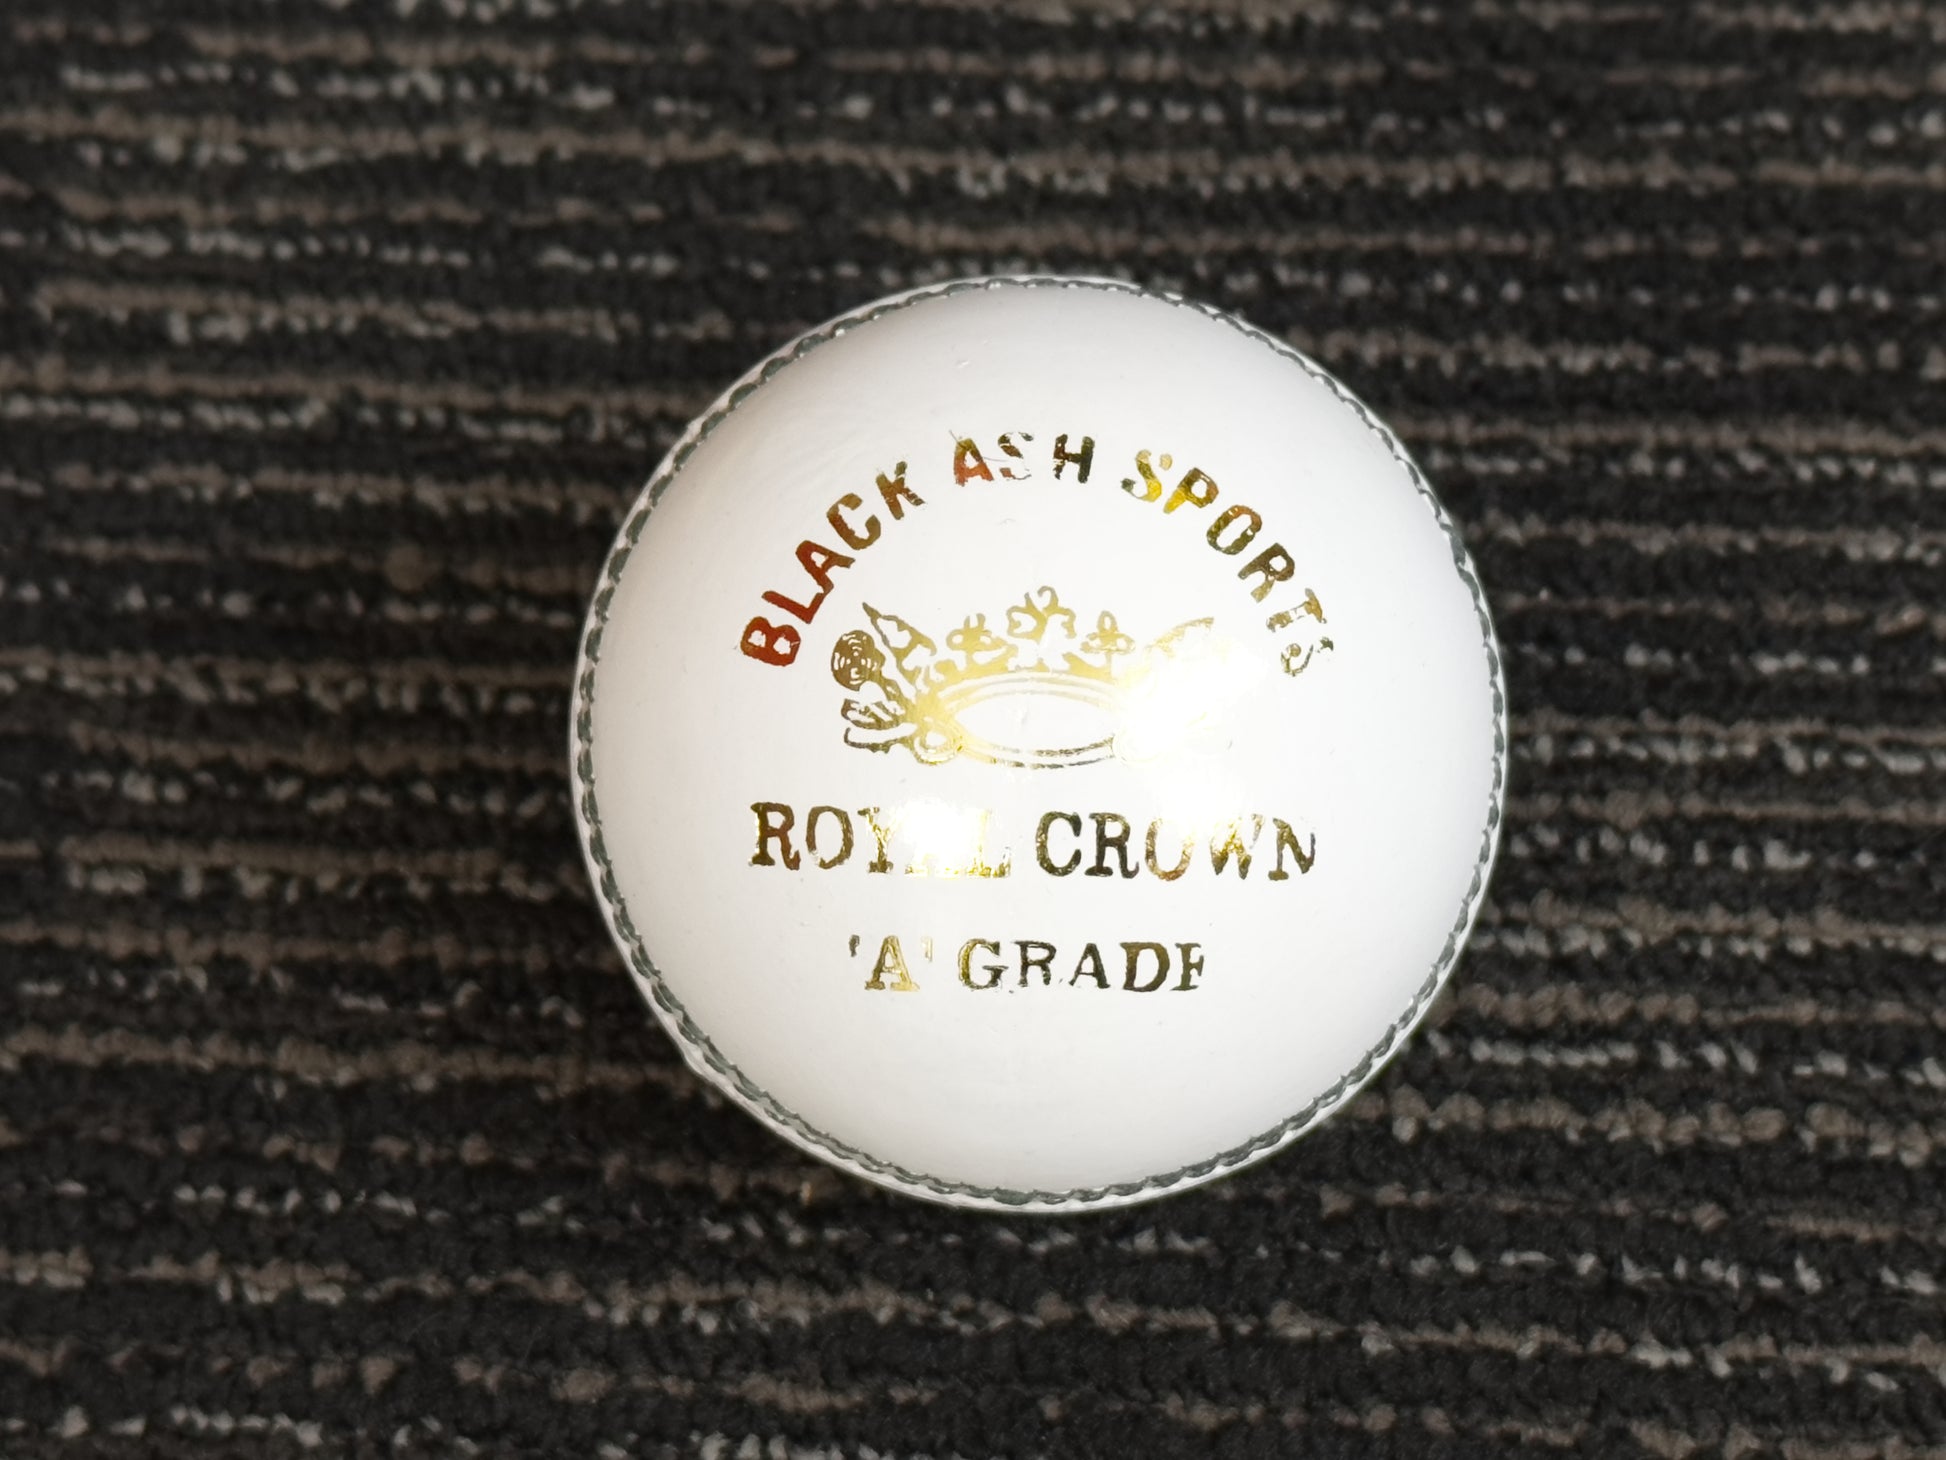 Black Ash Royal Crown pack of 6 white cricket leather balls, 156 grams, premium quality, suitable for 35 to 40 overs, with 4-piece construction, excellent shape retention, and MCC regulations compliant.